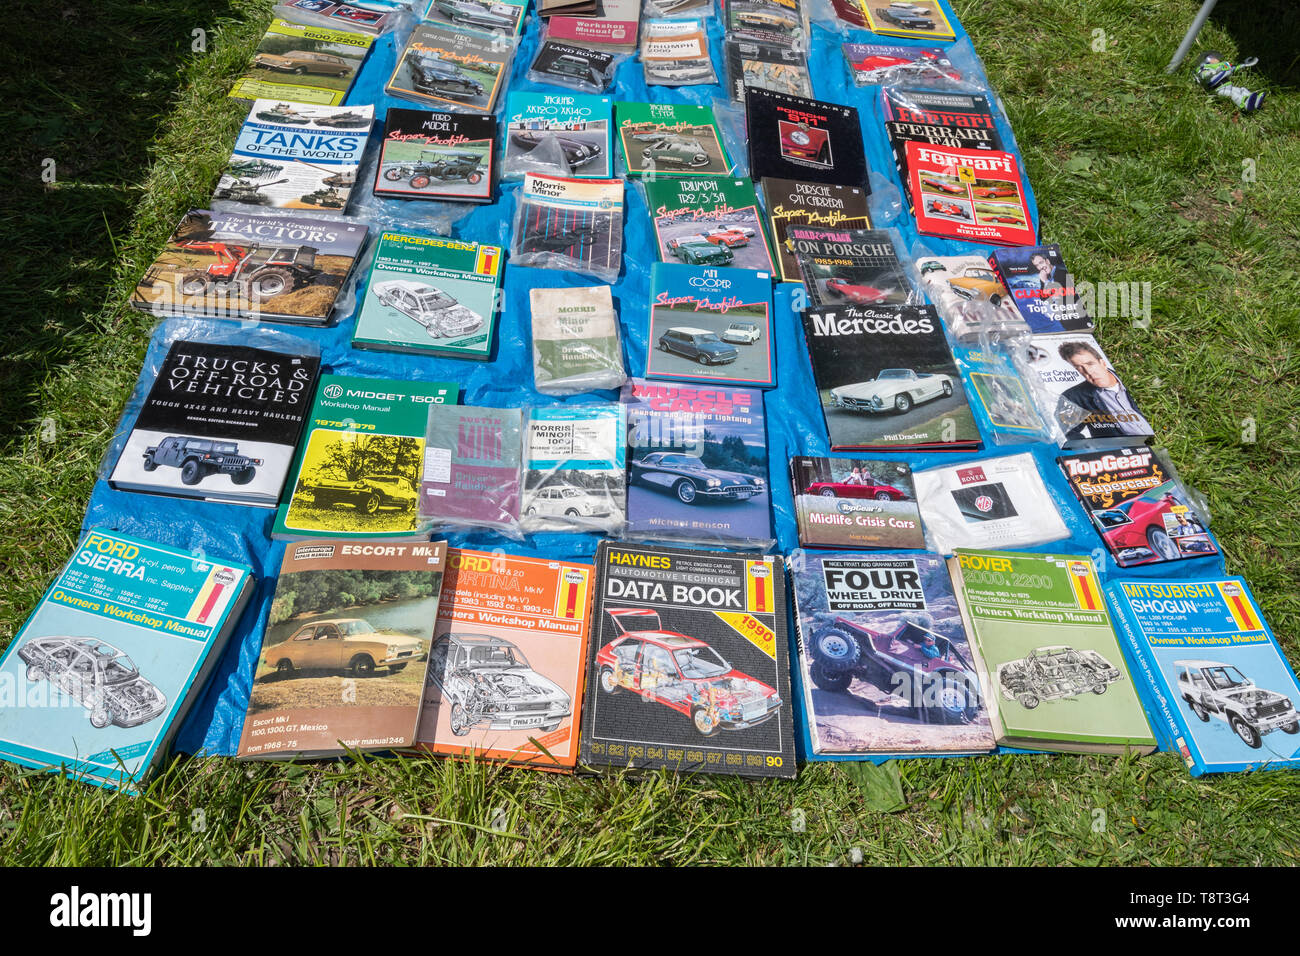 Haynes manuals and other books about cars and vehicles laid out on the ground for sale on a trade stand at a UK car show Stock Photo